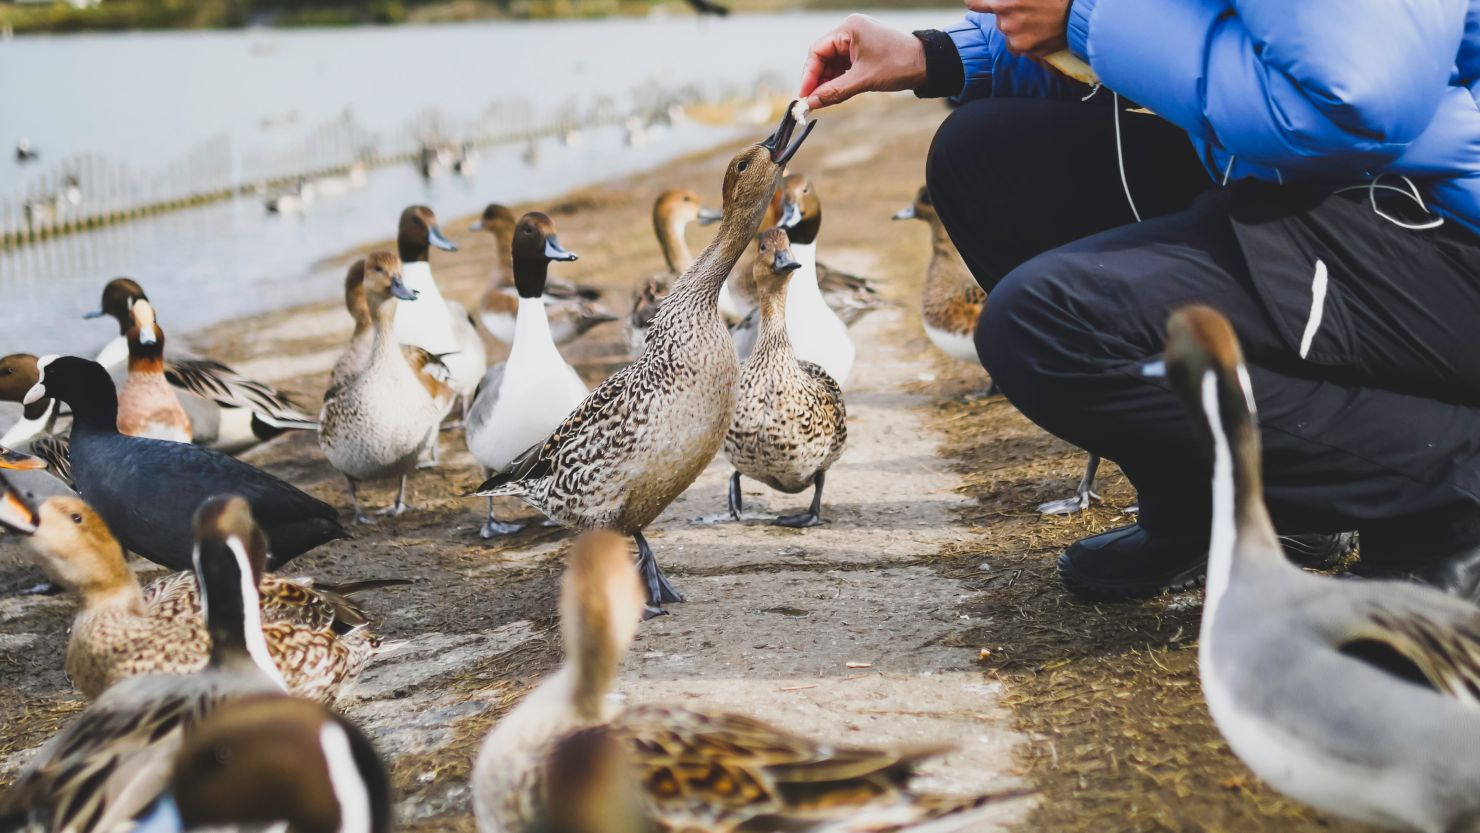 A mysterious sign has sparked debate on whether feeding bread to ducks is good or bad for the creatures.